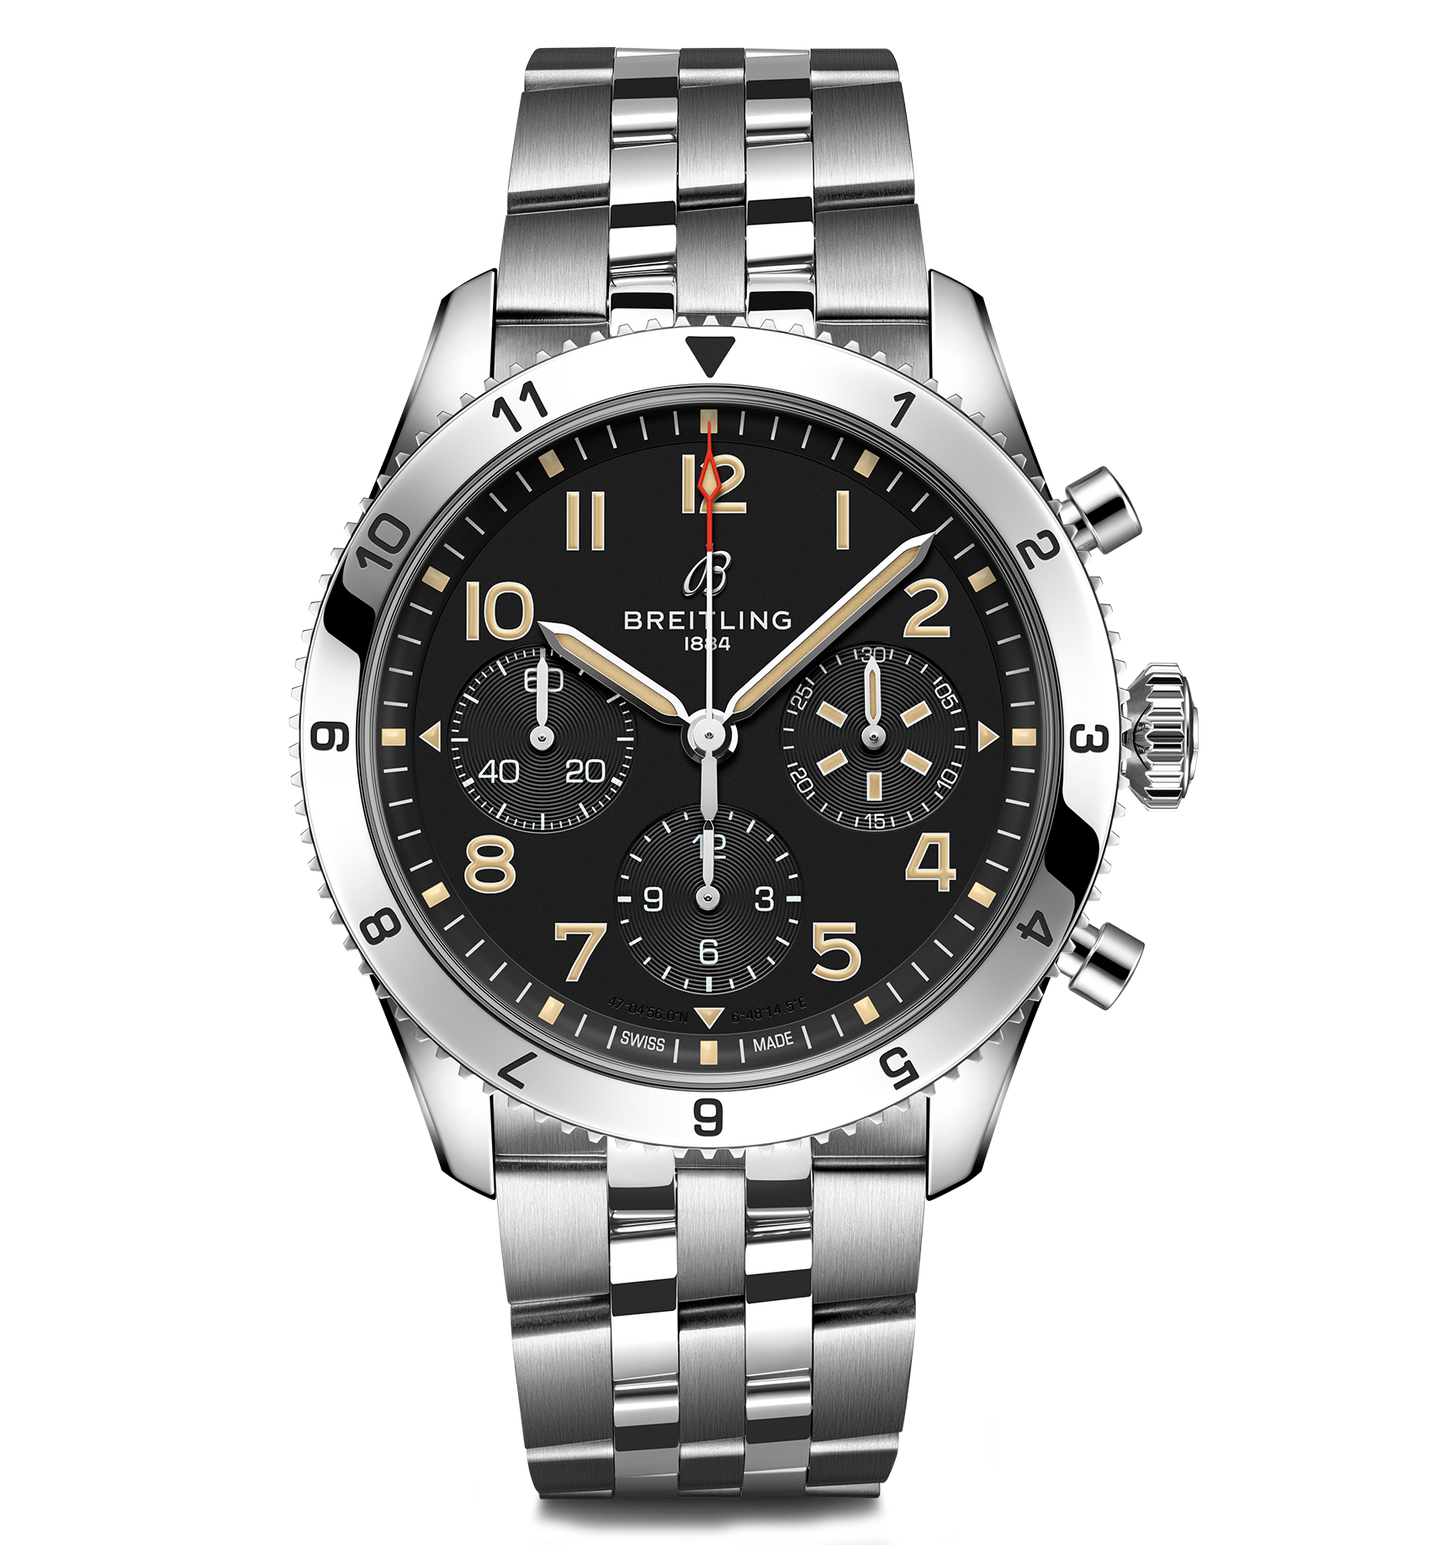 Breitling Classic AVI Chronograph 42 P-51 Mustang Watch with Stainless Steel Bracelet